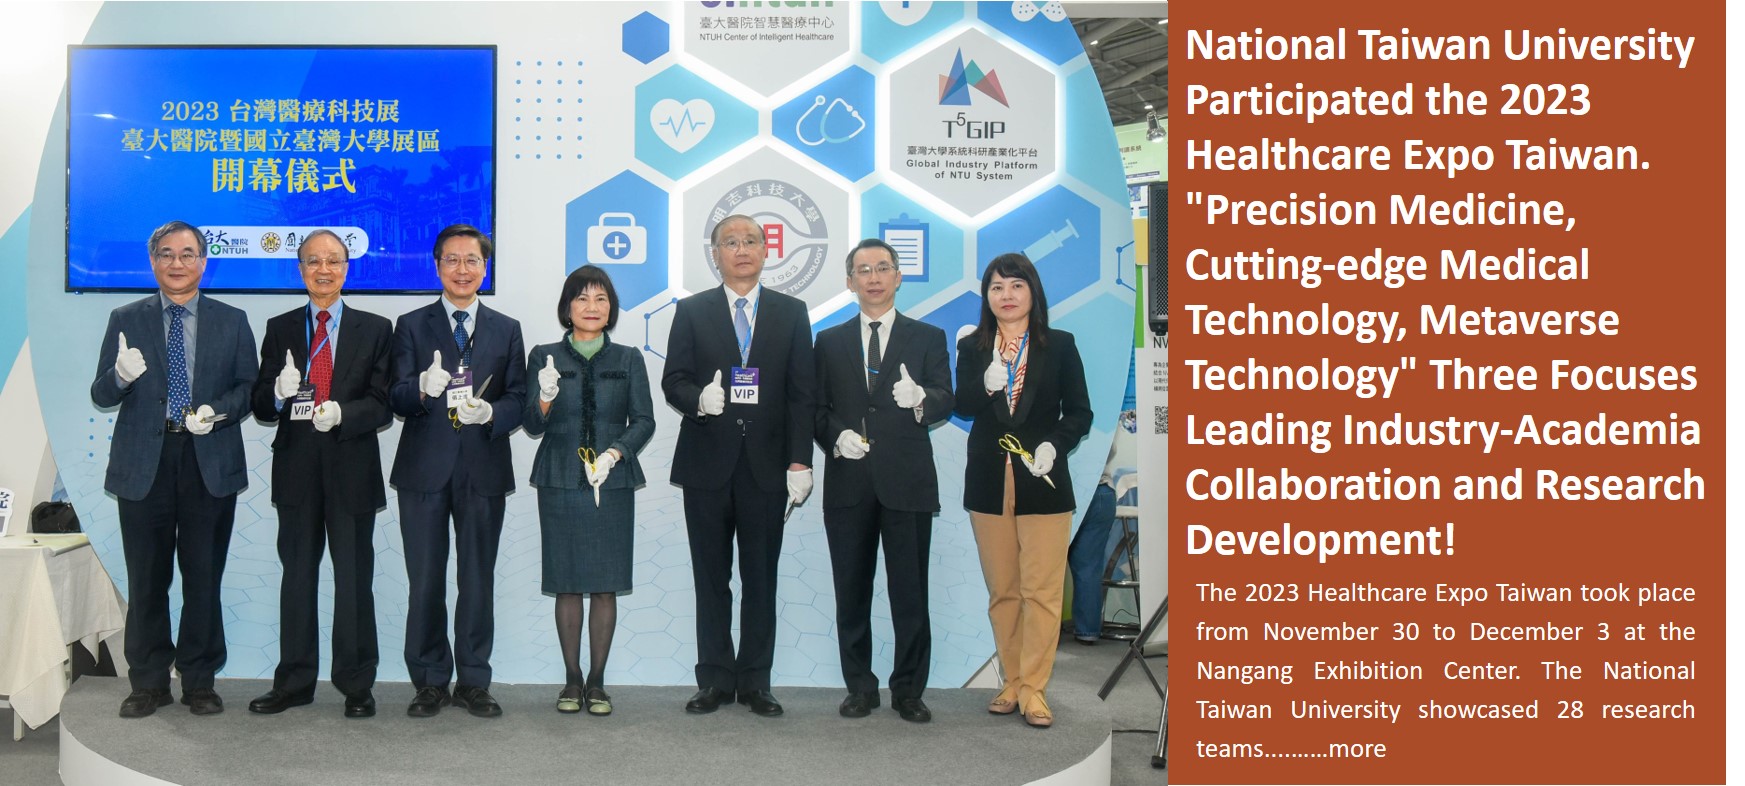 National Taiwan University Participated the 2023 Healthcare Expo Taiwan. 